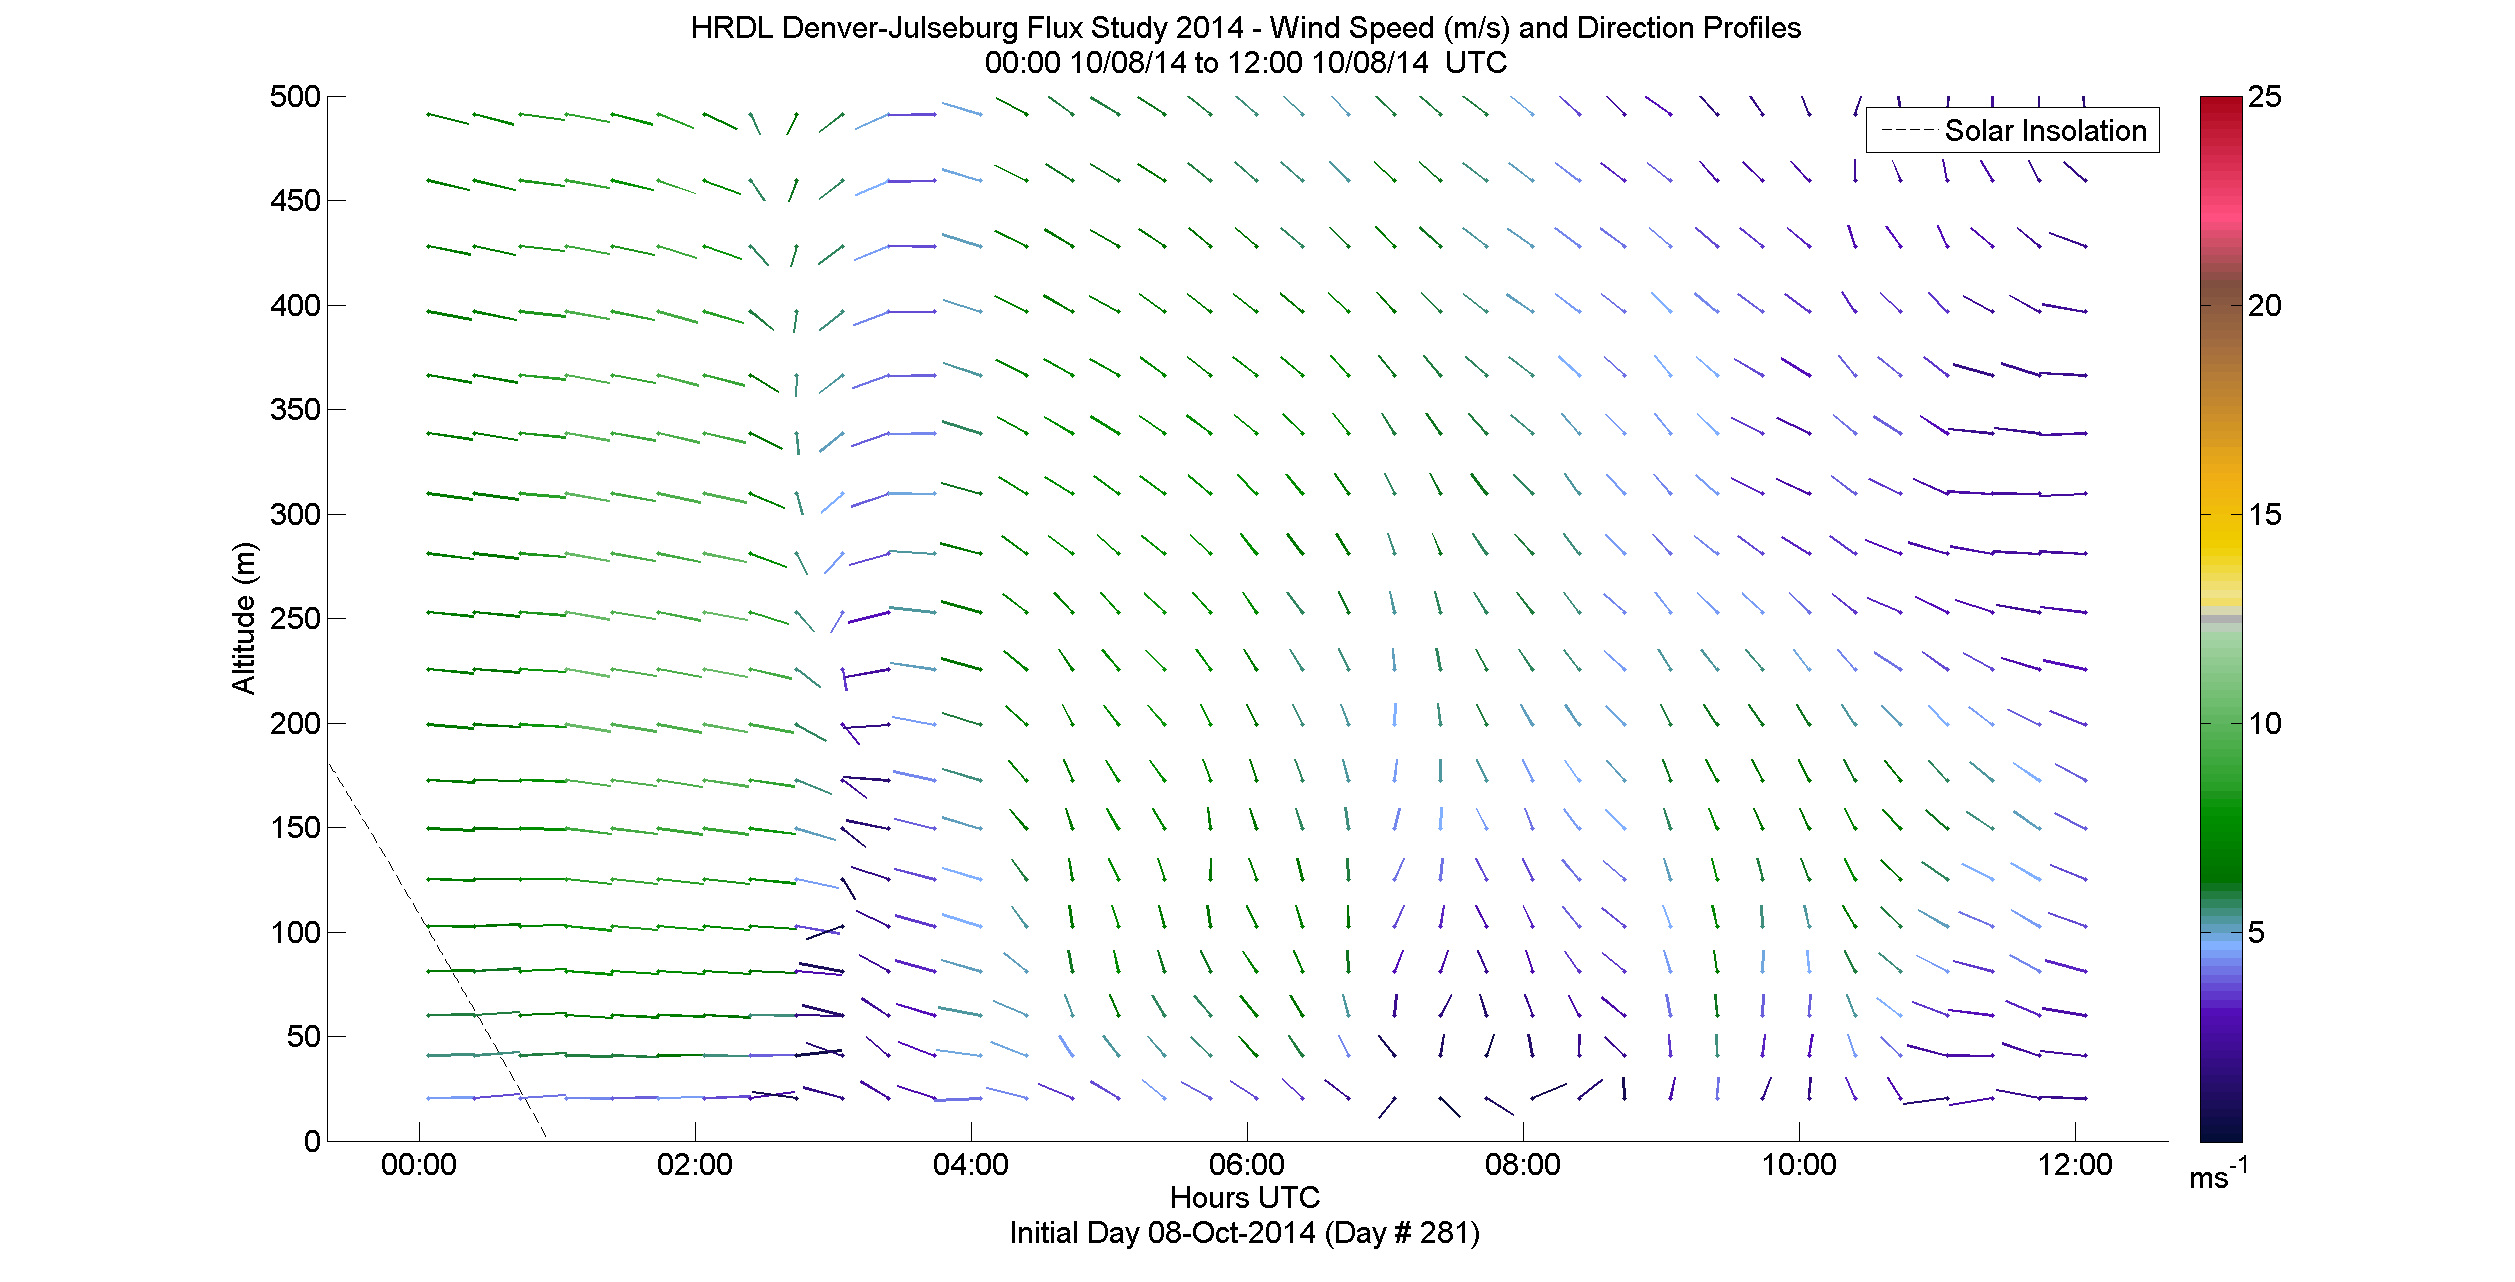 HRDL speed and direction profile - October 8 am